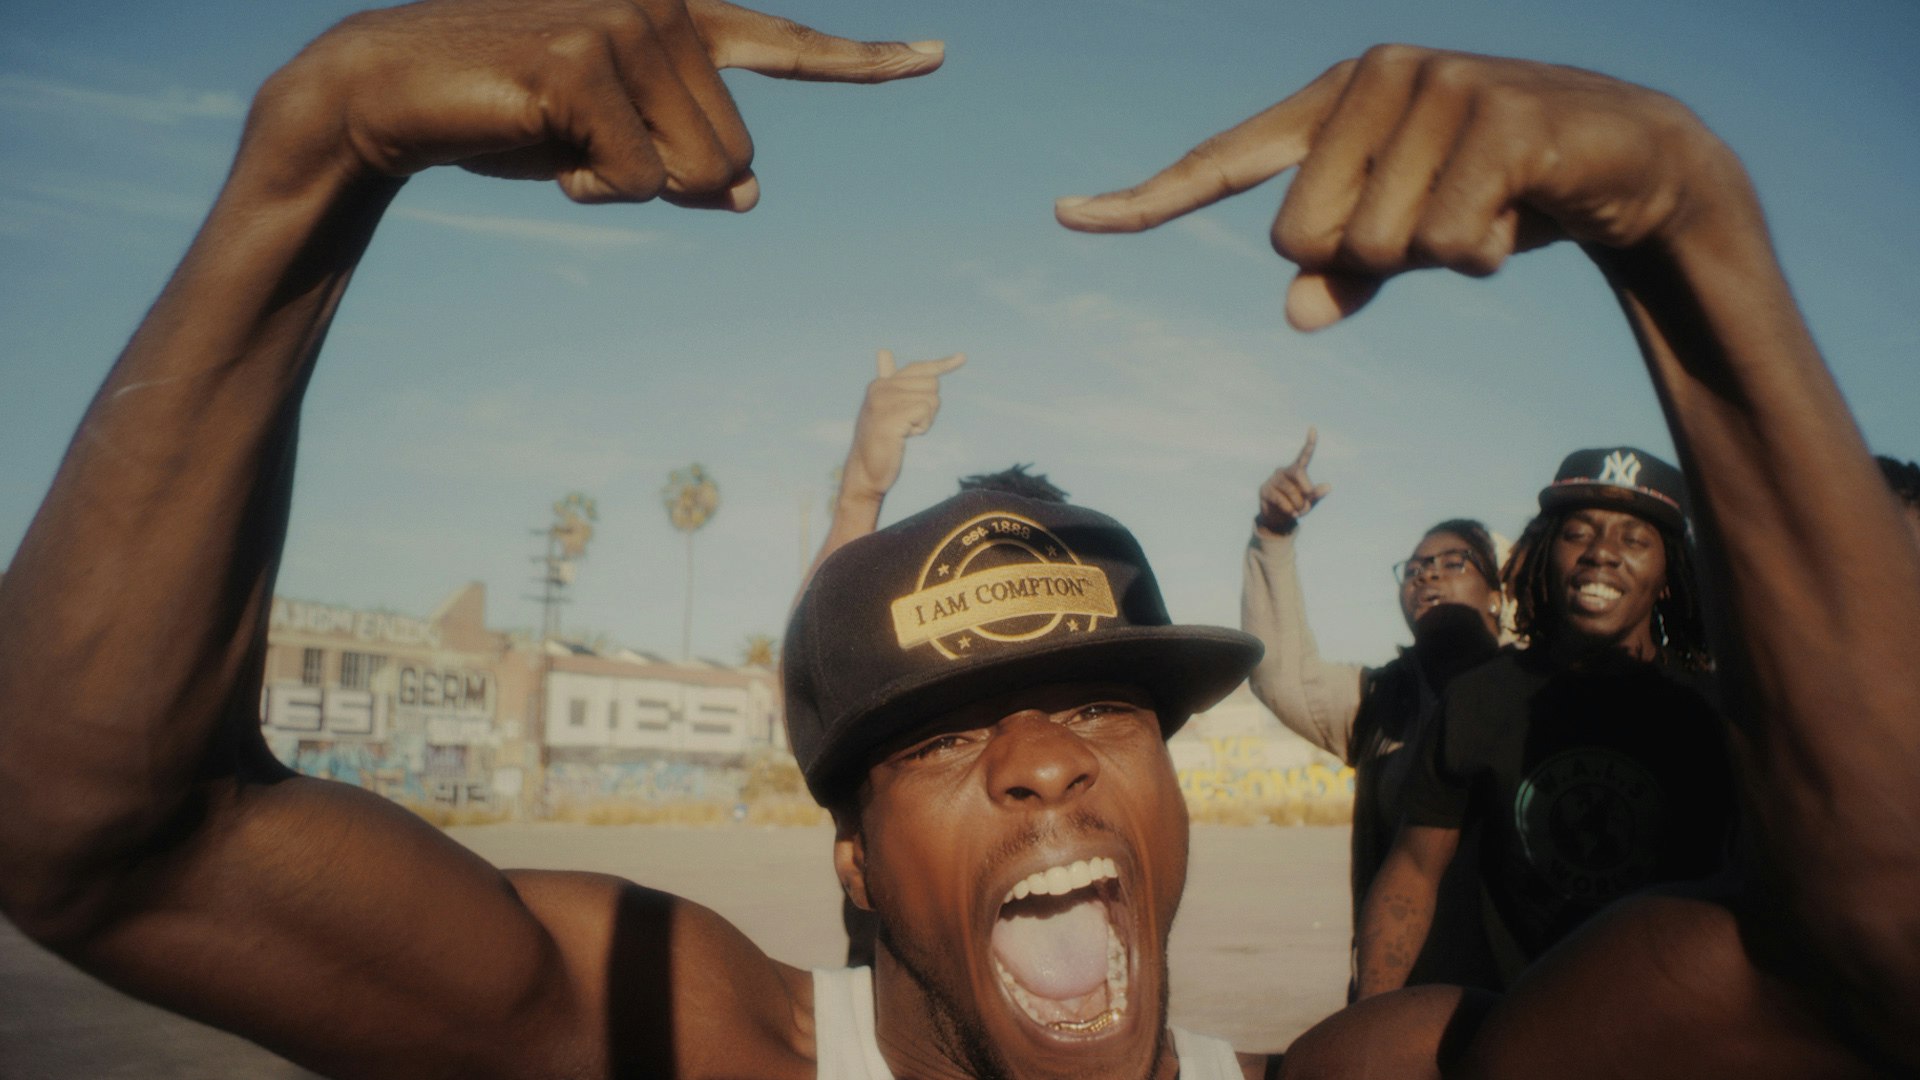 For the people of South Central LA, Krumping is therapy